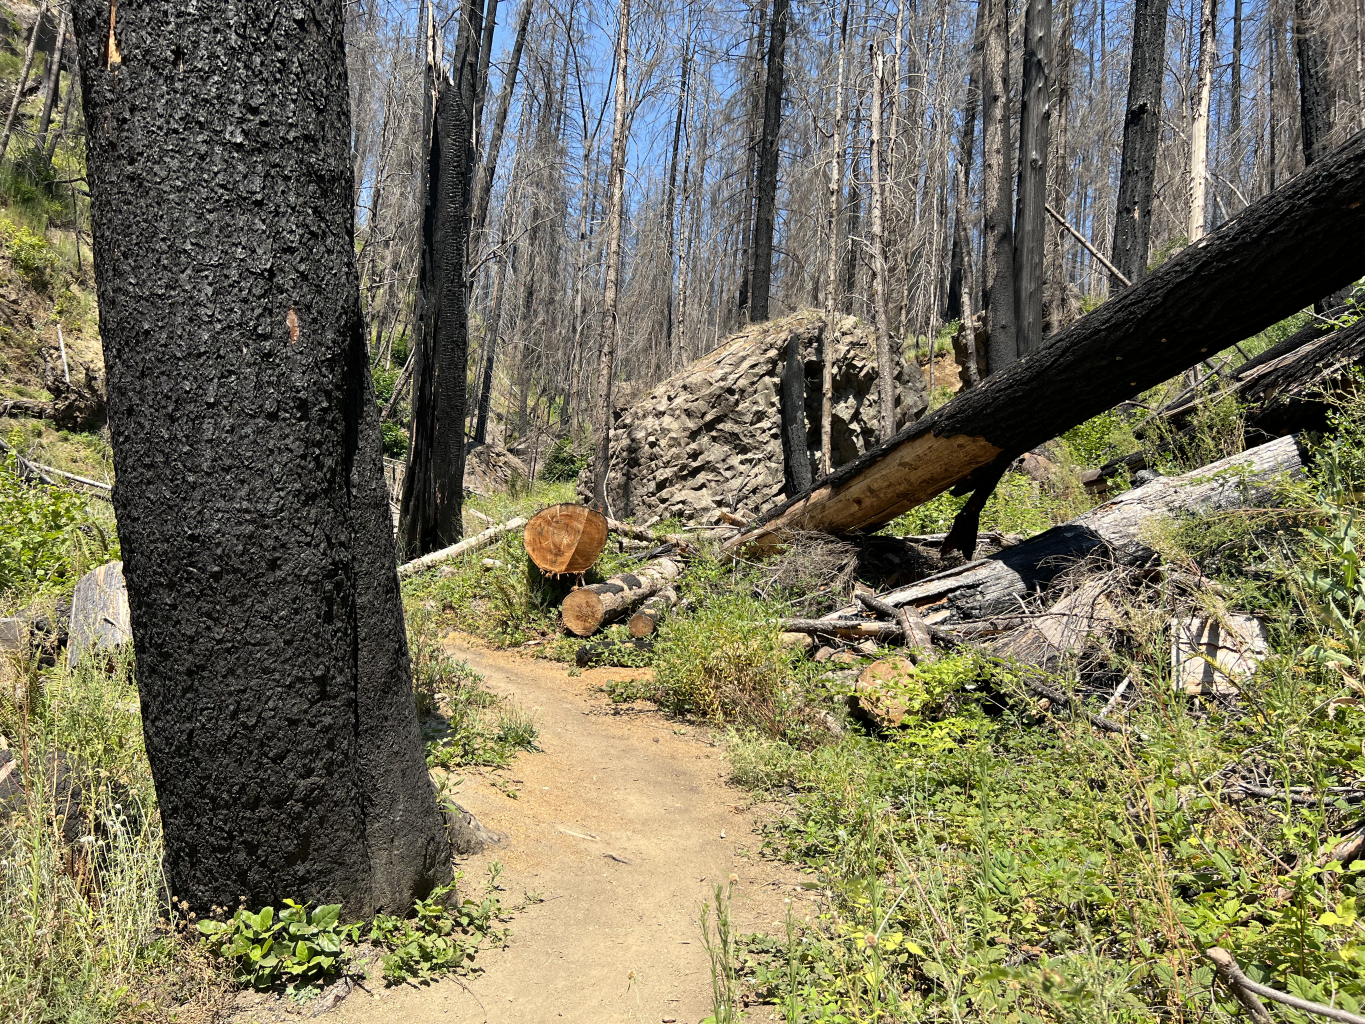  On the highway 138 route from Roseburg to Diamond Lake, we stopped at Falls Creek to observe the fire damage and huge boulders of basalt or andesite that were strewn in the creek vale. 